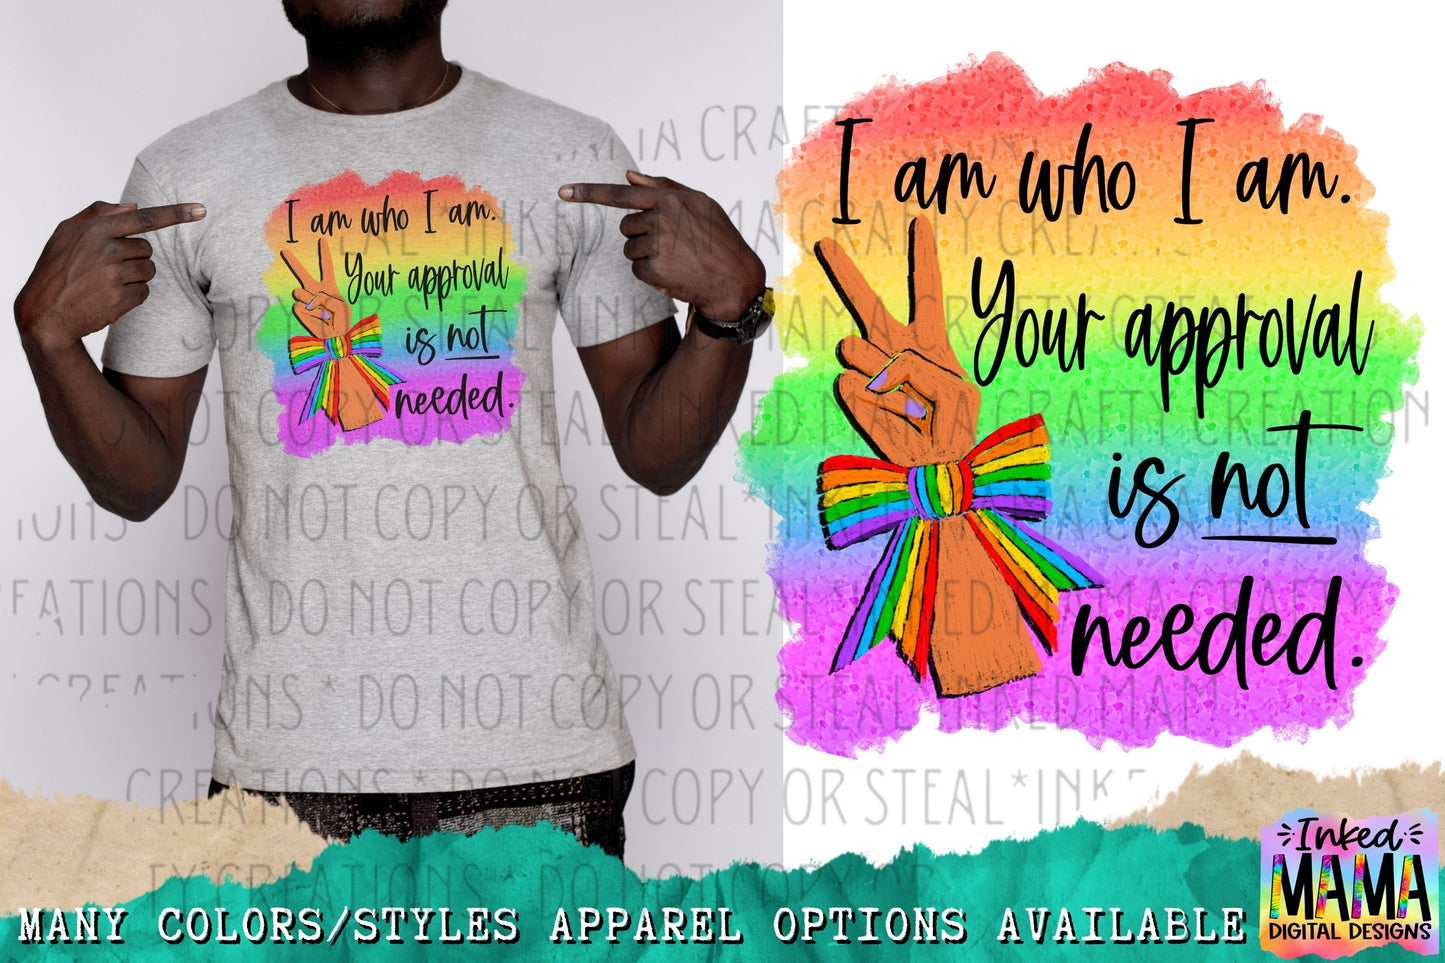 I am who I am. Your approval is not needed. - LGBTQIA+ PRIDE Apparel